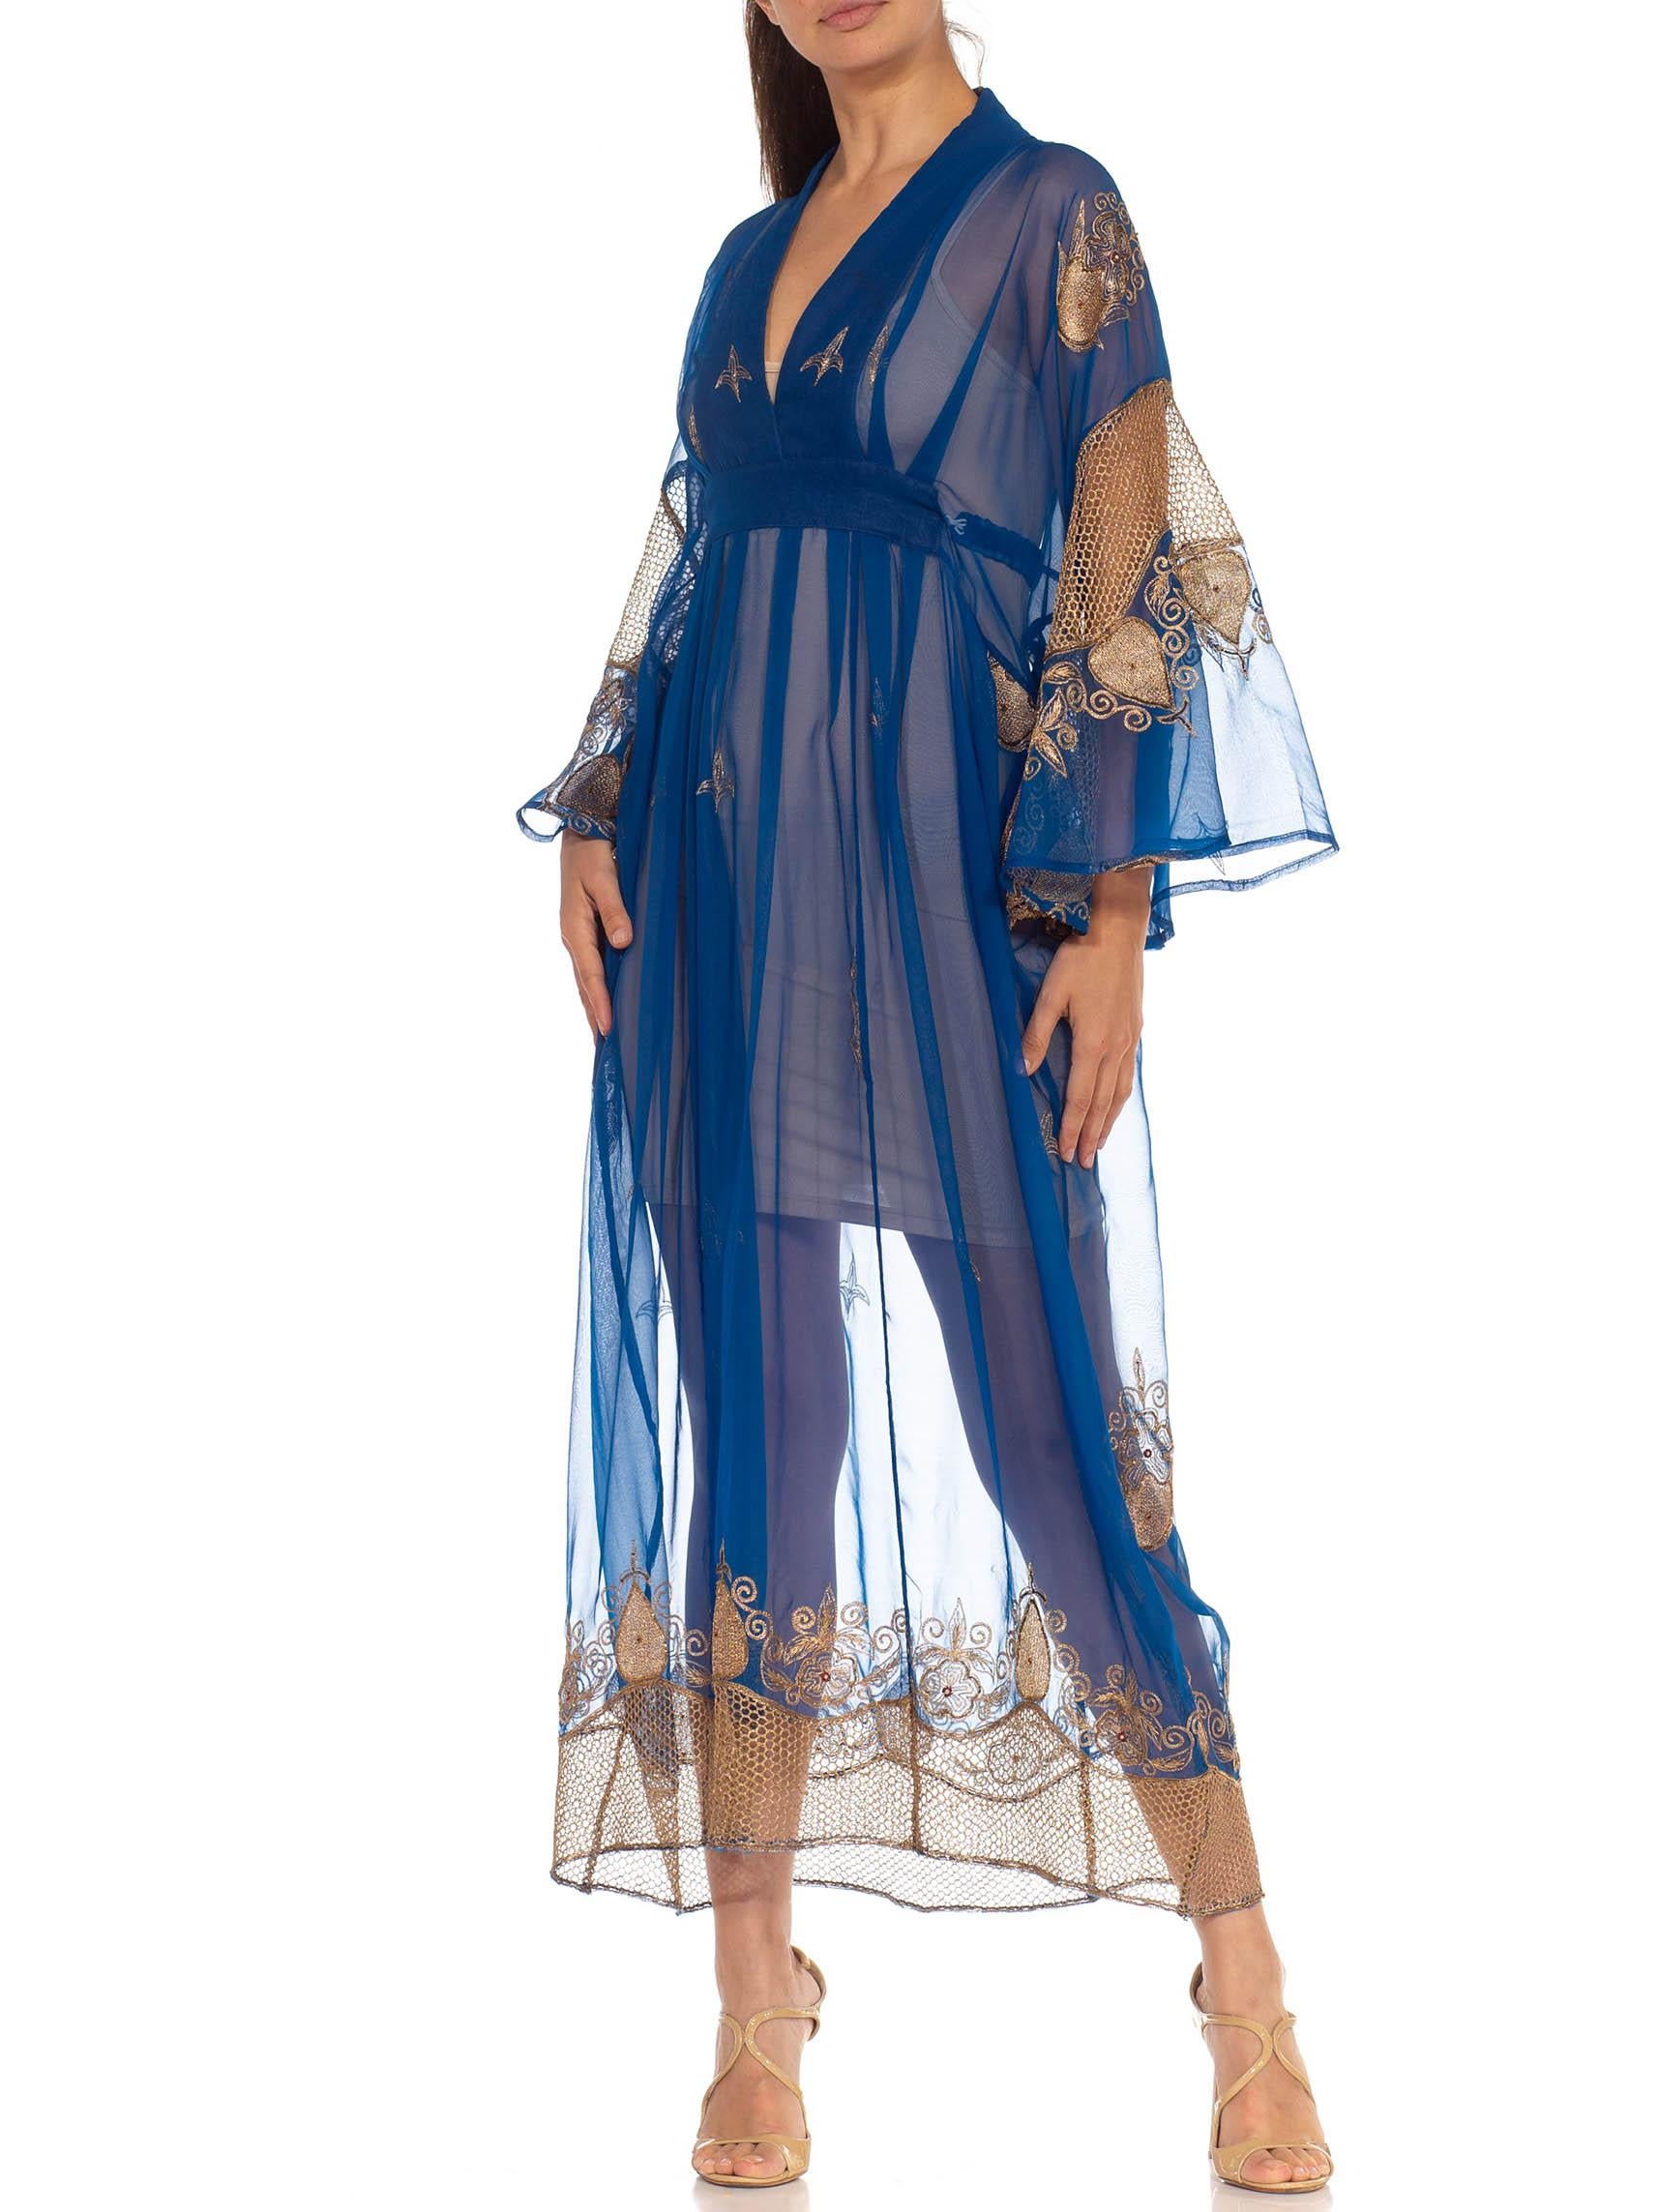 Morphew Collection Blue & Gold Silk Kaftan Made From Vintage Saris For Sale 3